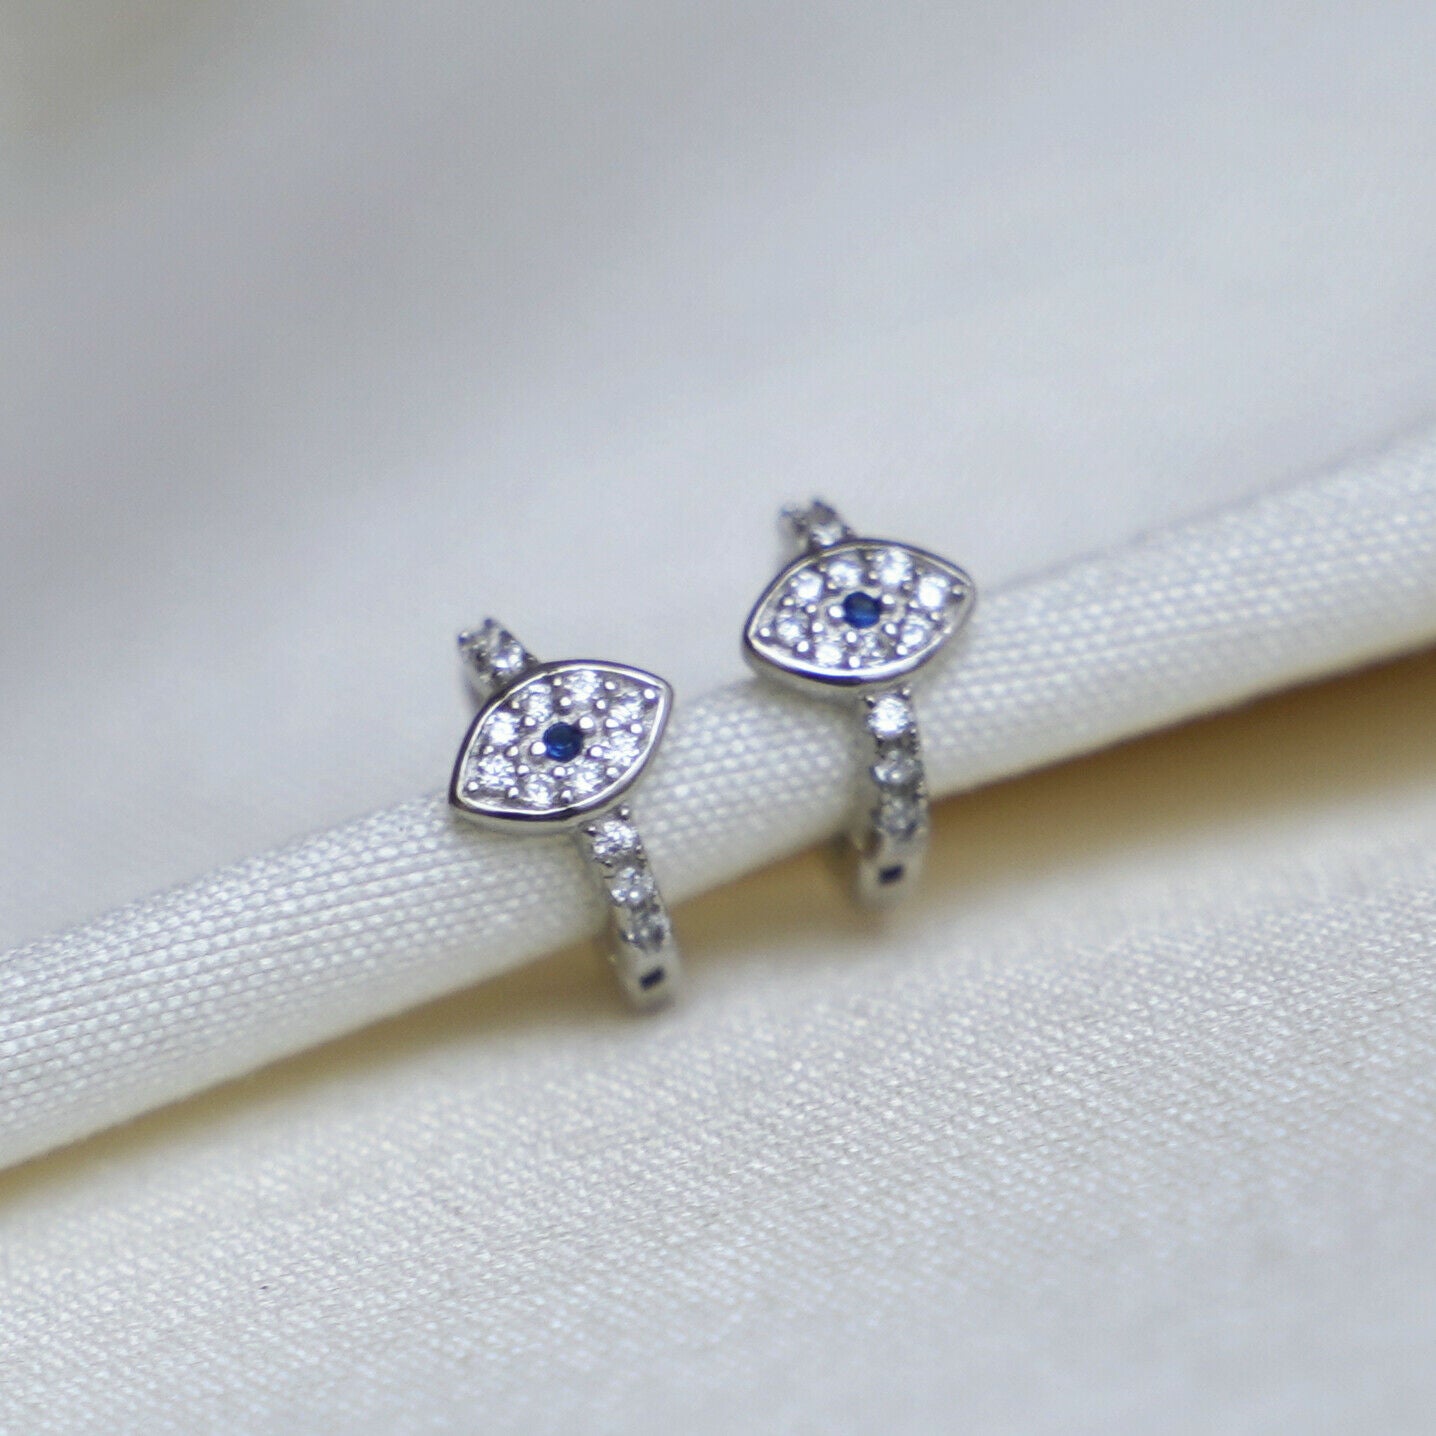 8mm Sterling Silver Evil Eye Hoop Earrings with Blue and White CZ Paving - sugarkittenlondon